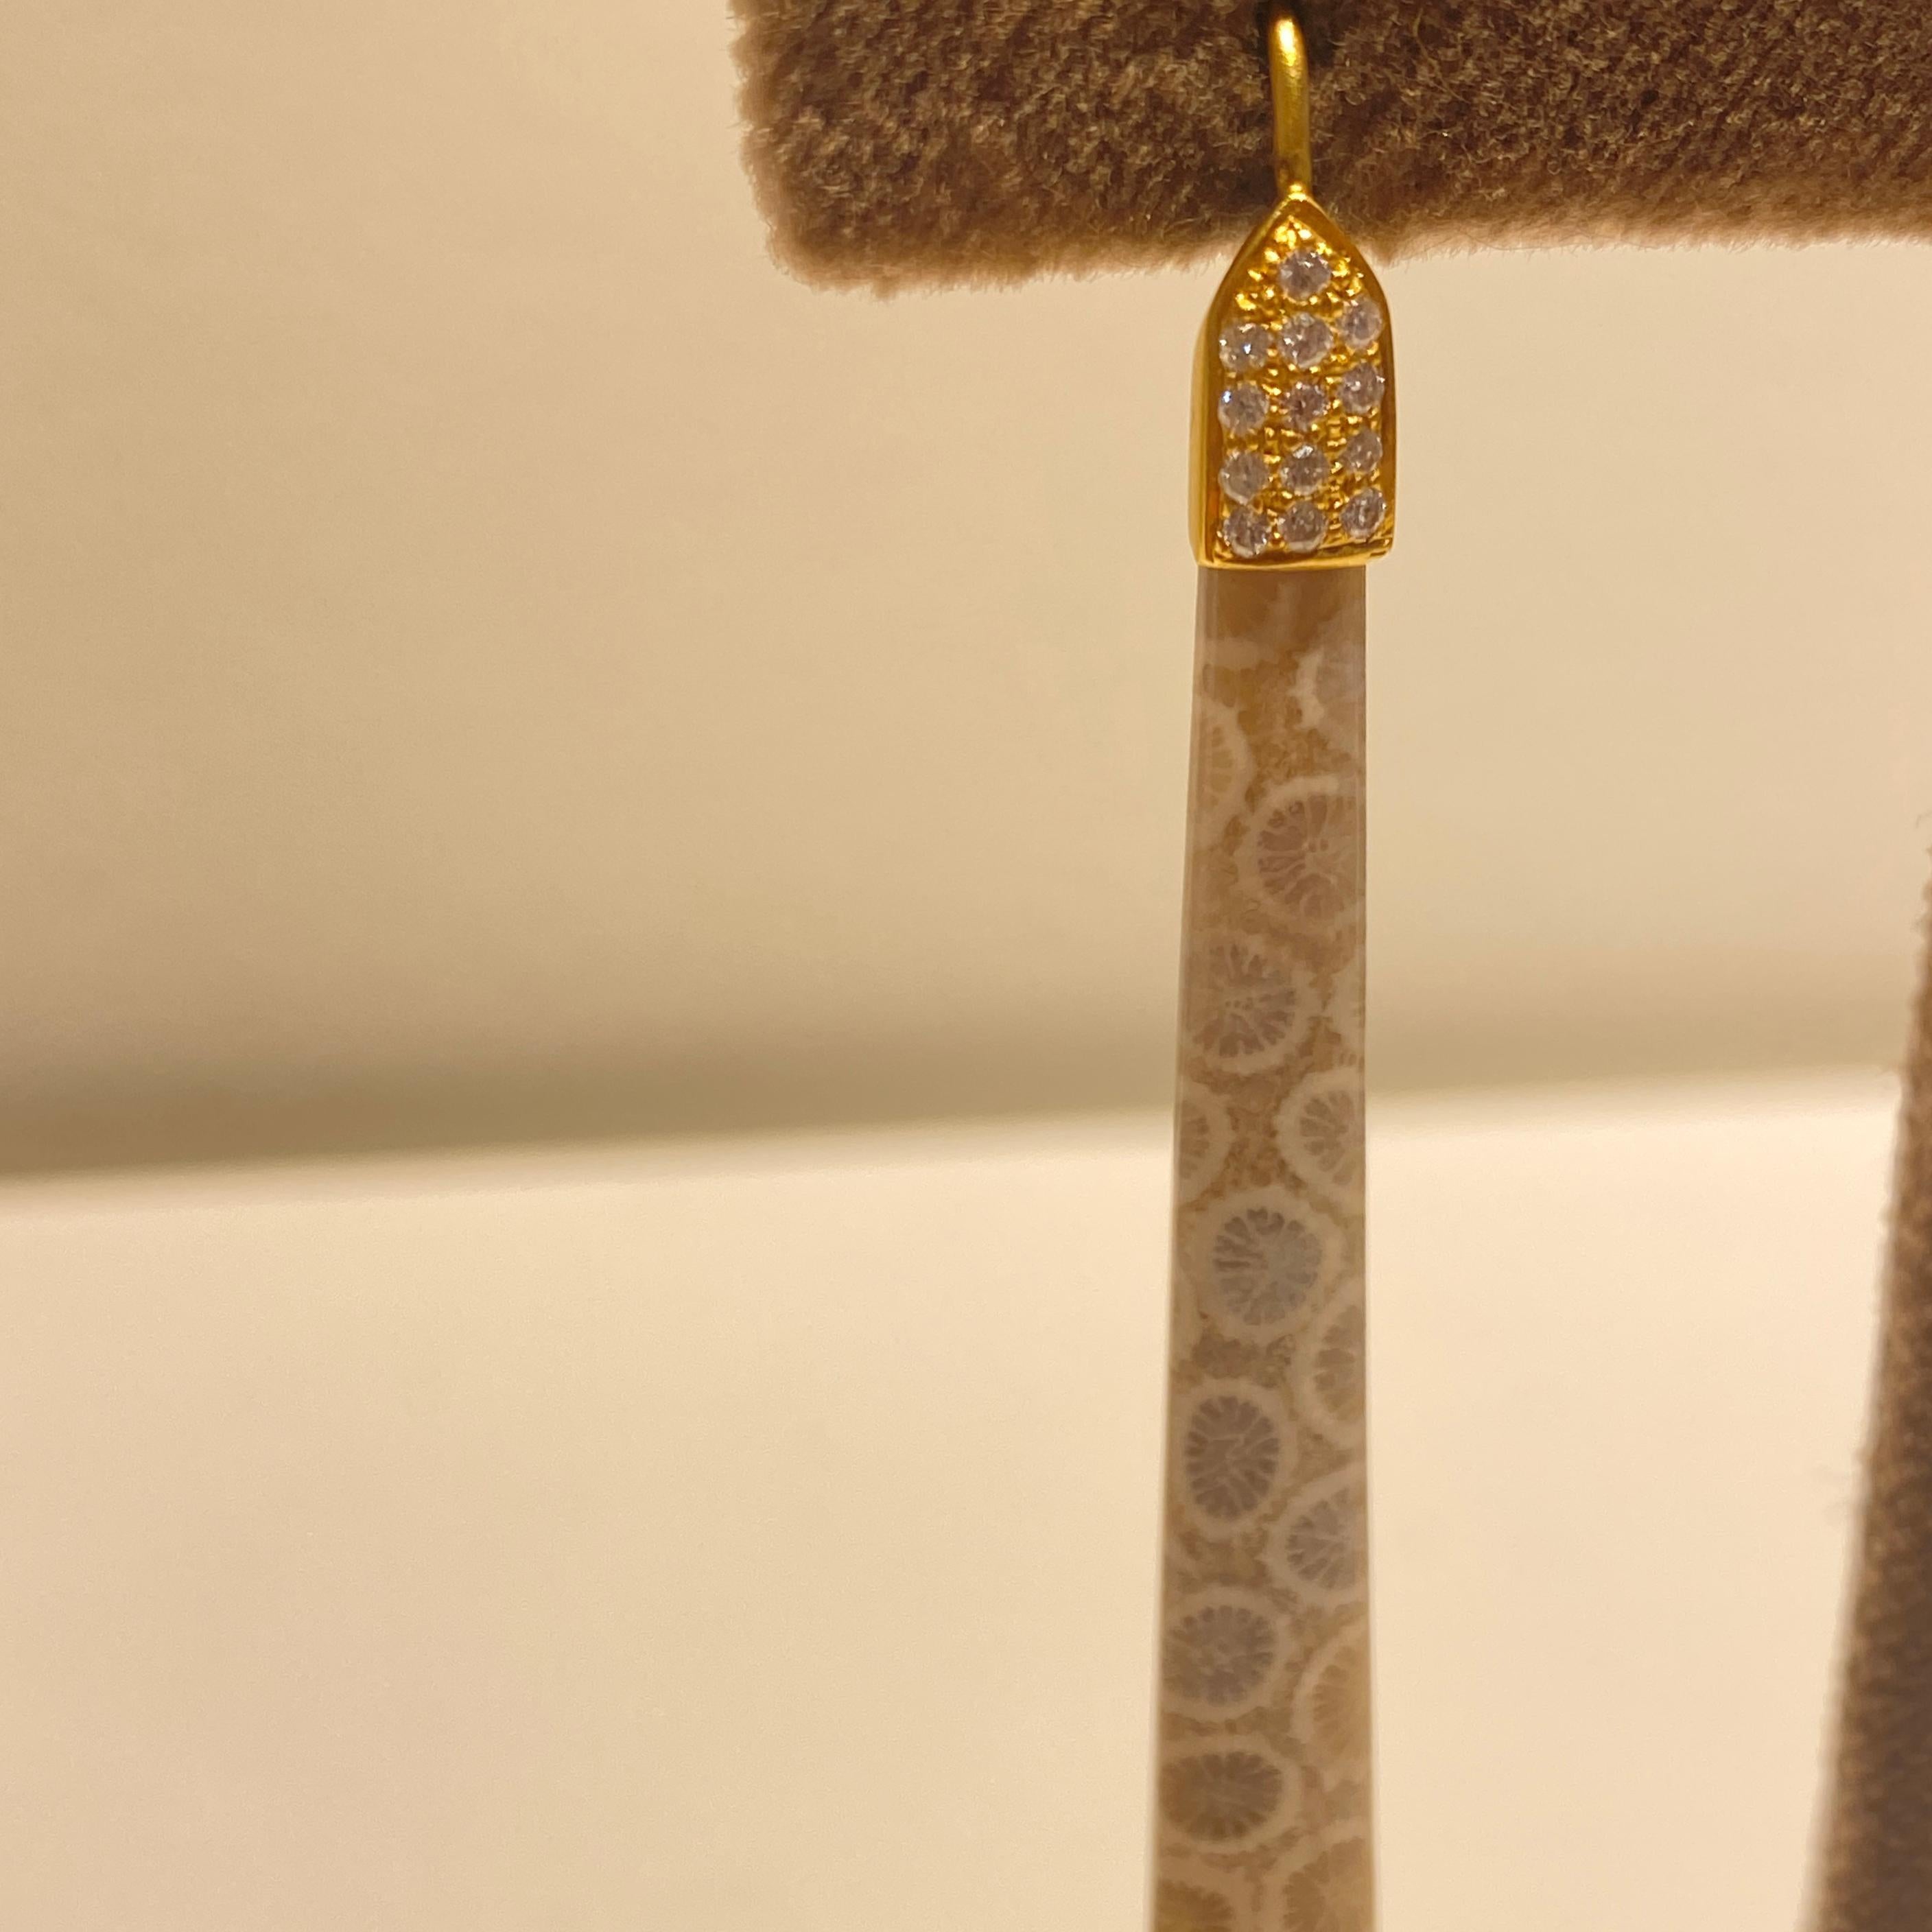 Brilliant Cut Lauren Harper Fossilized Coral Earrings with Diamonds in 18K Yellow Gold